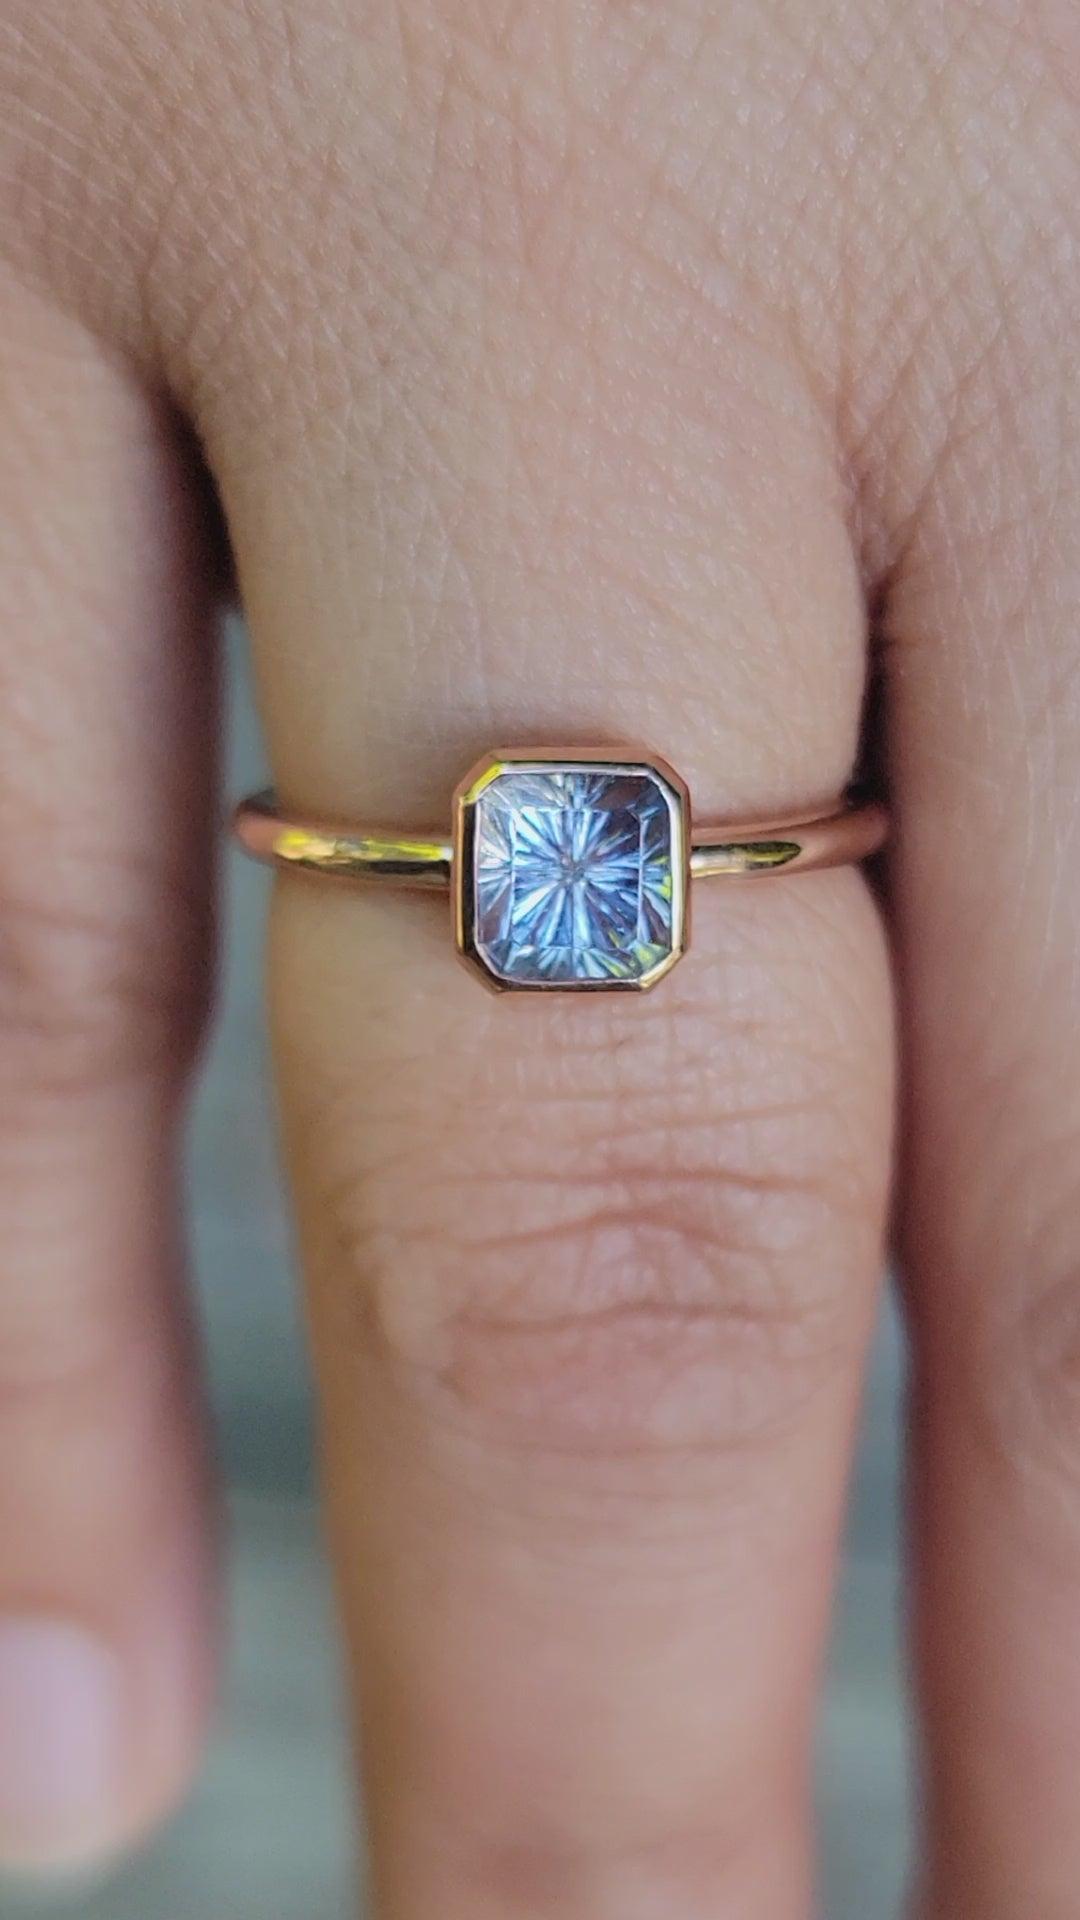 Medium/Lightweight Rose Gold Bezel Ring Setting - Depicted with Fantasy Inverted Cut Montana Sapphire (Setting Only, Center Stone Sold Separately)